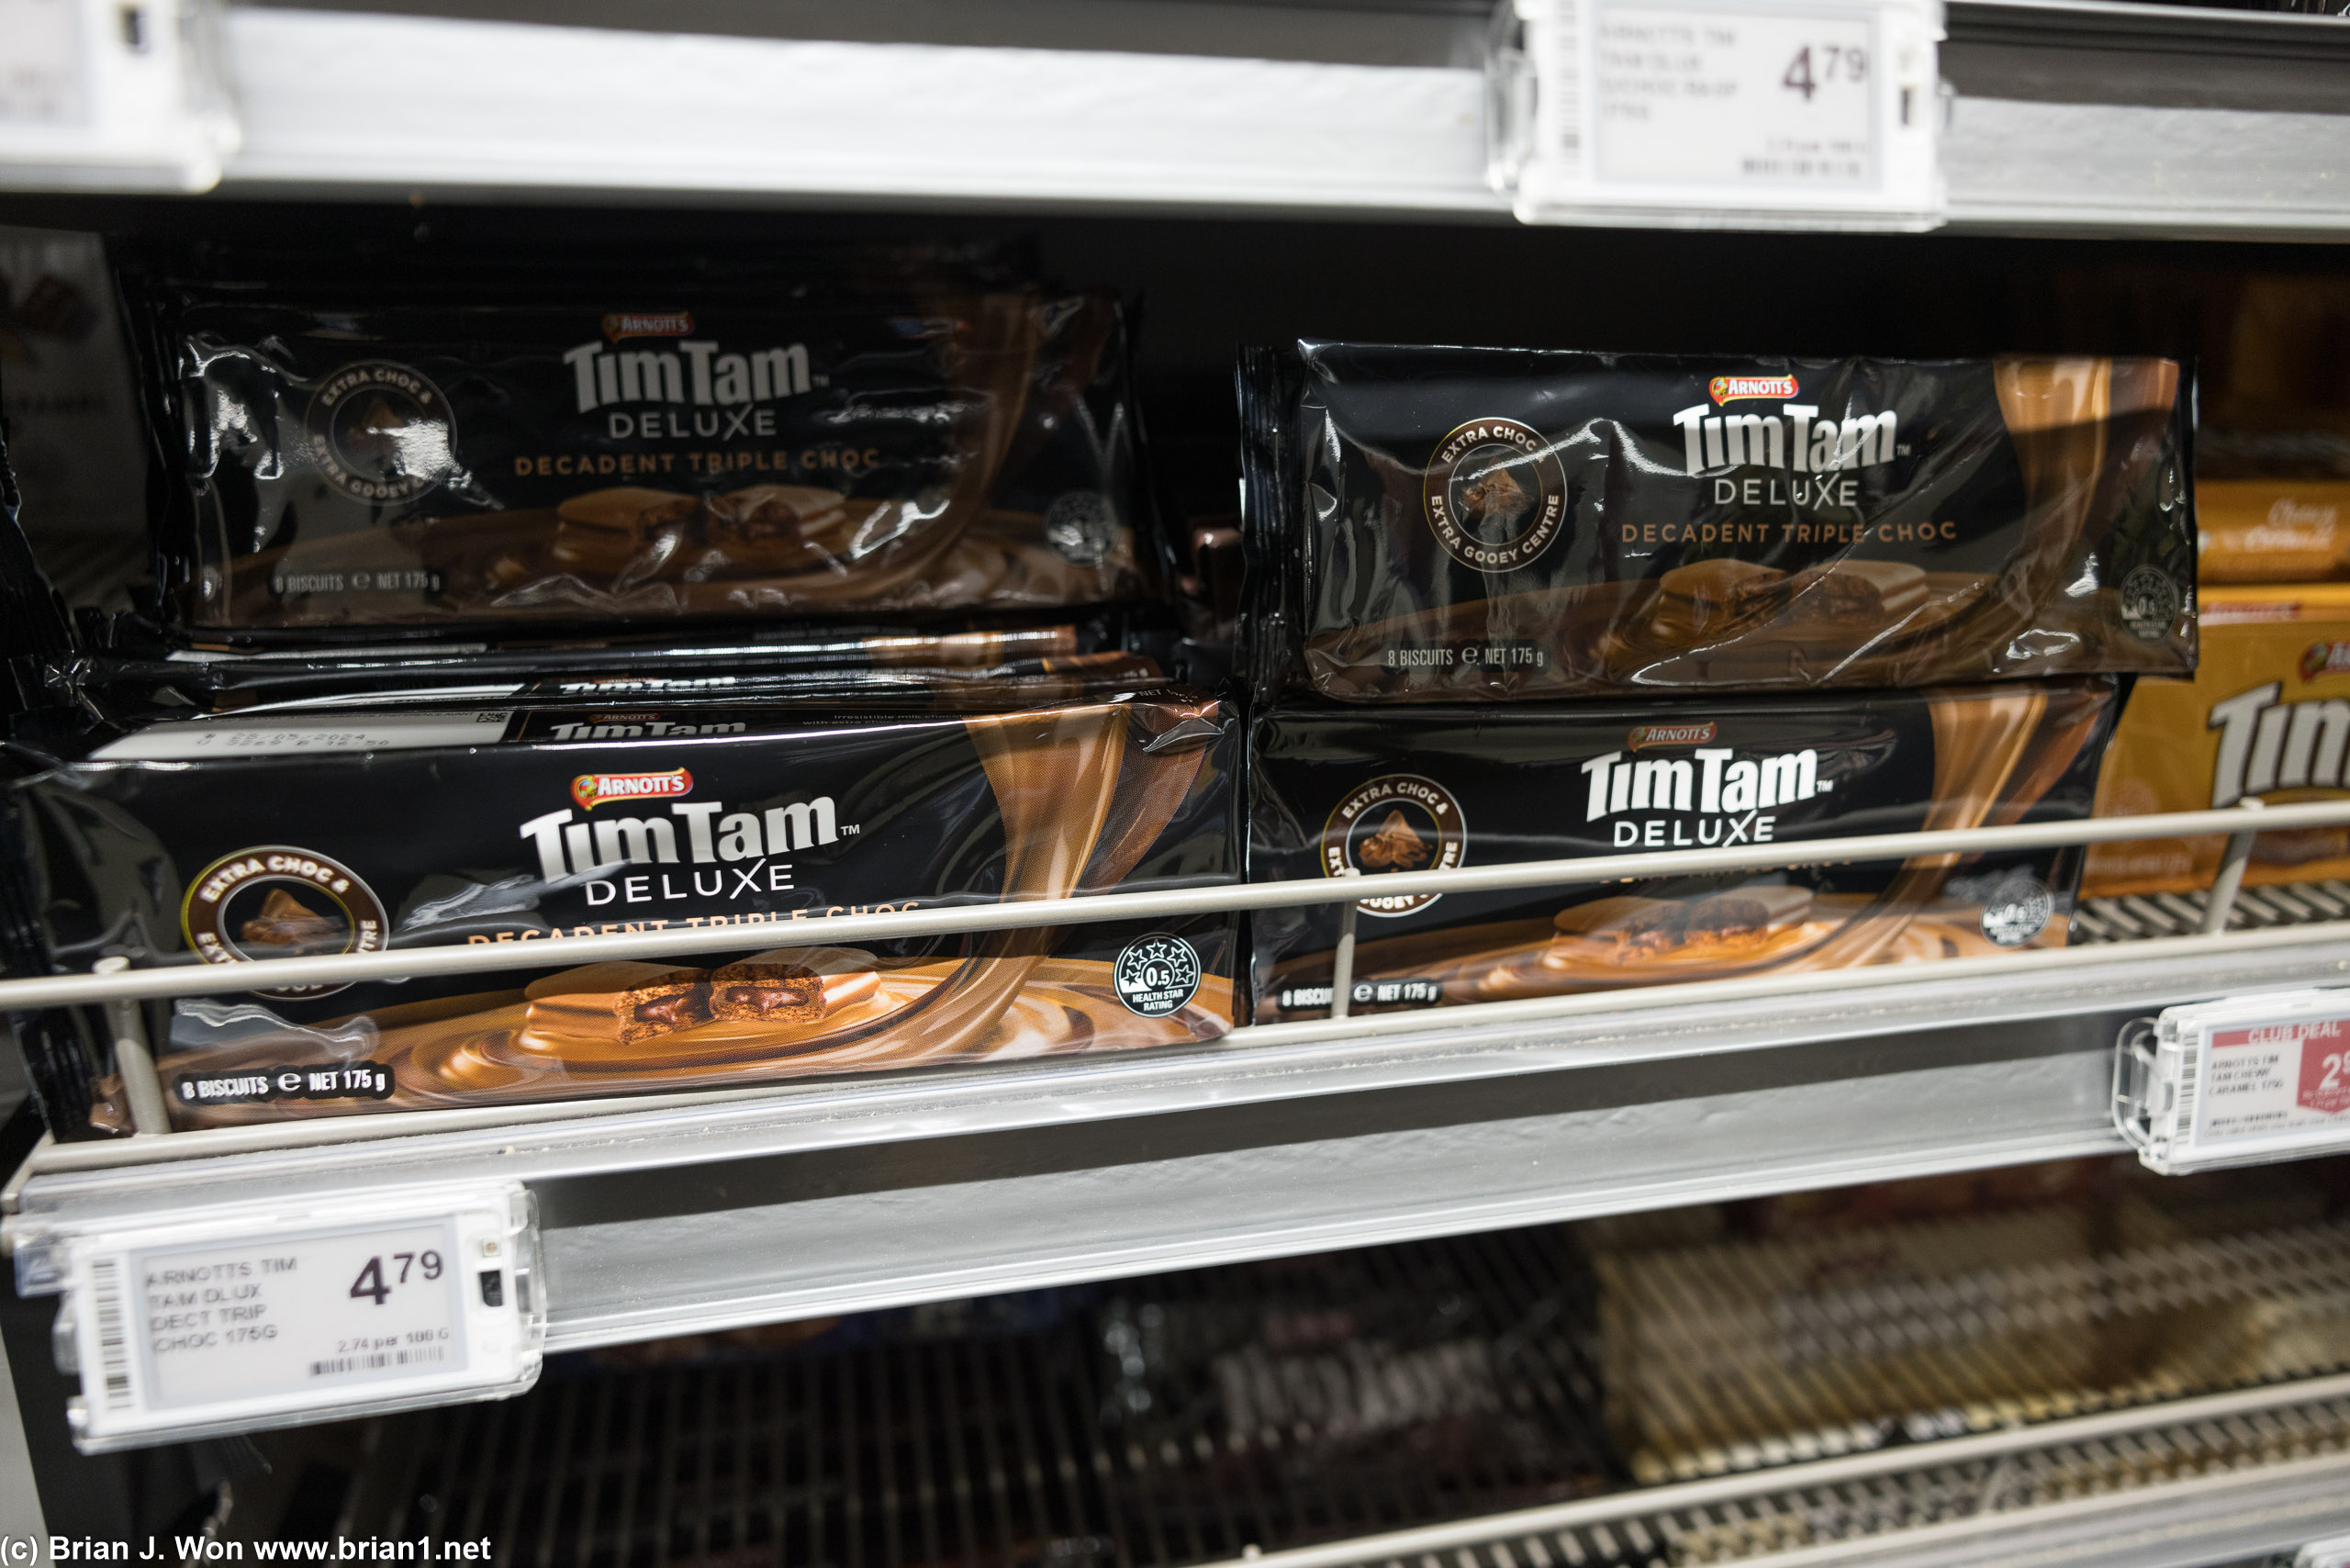 Today I learned there is a Tim Tam Deluxe.